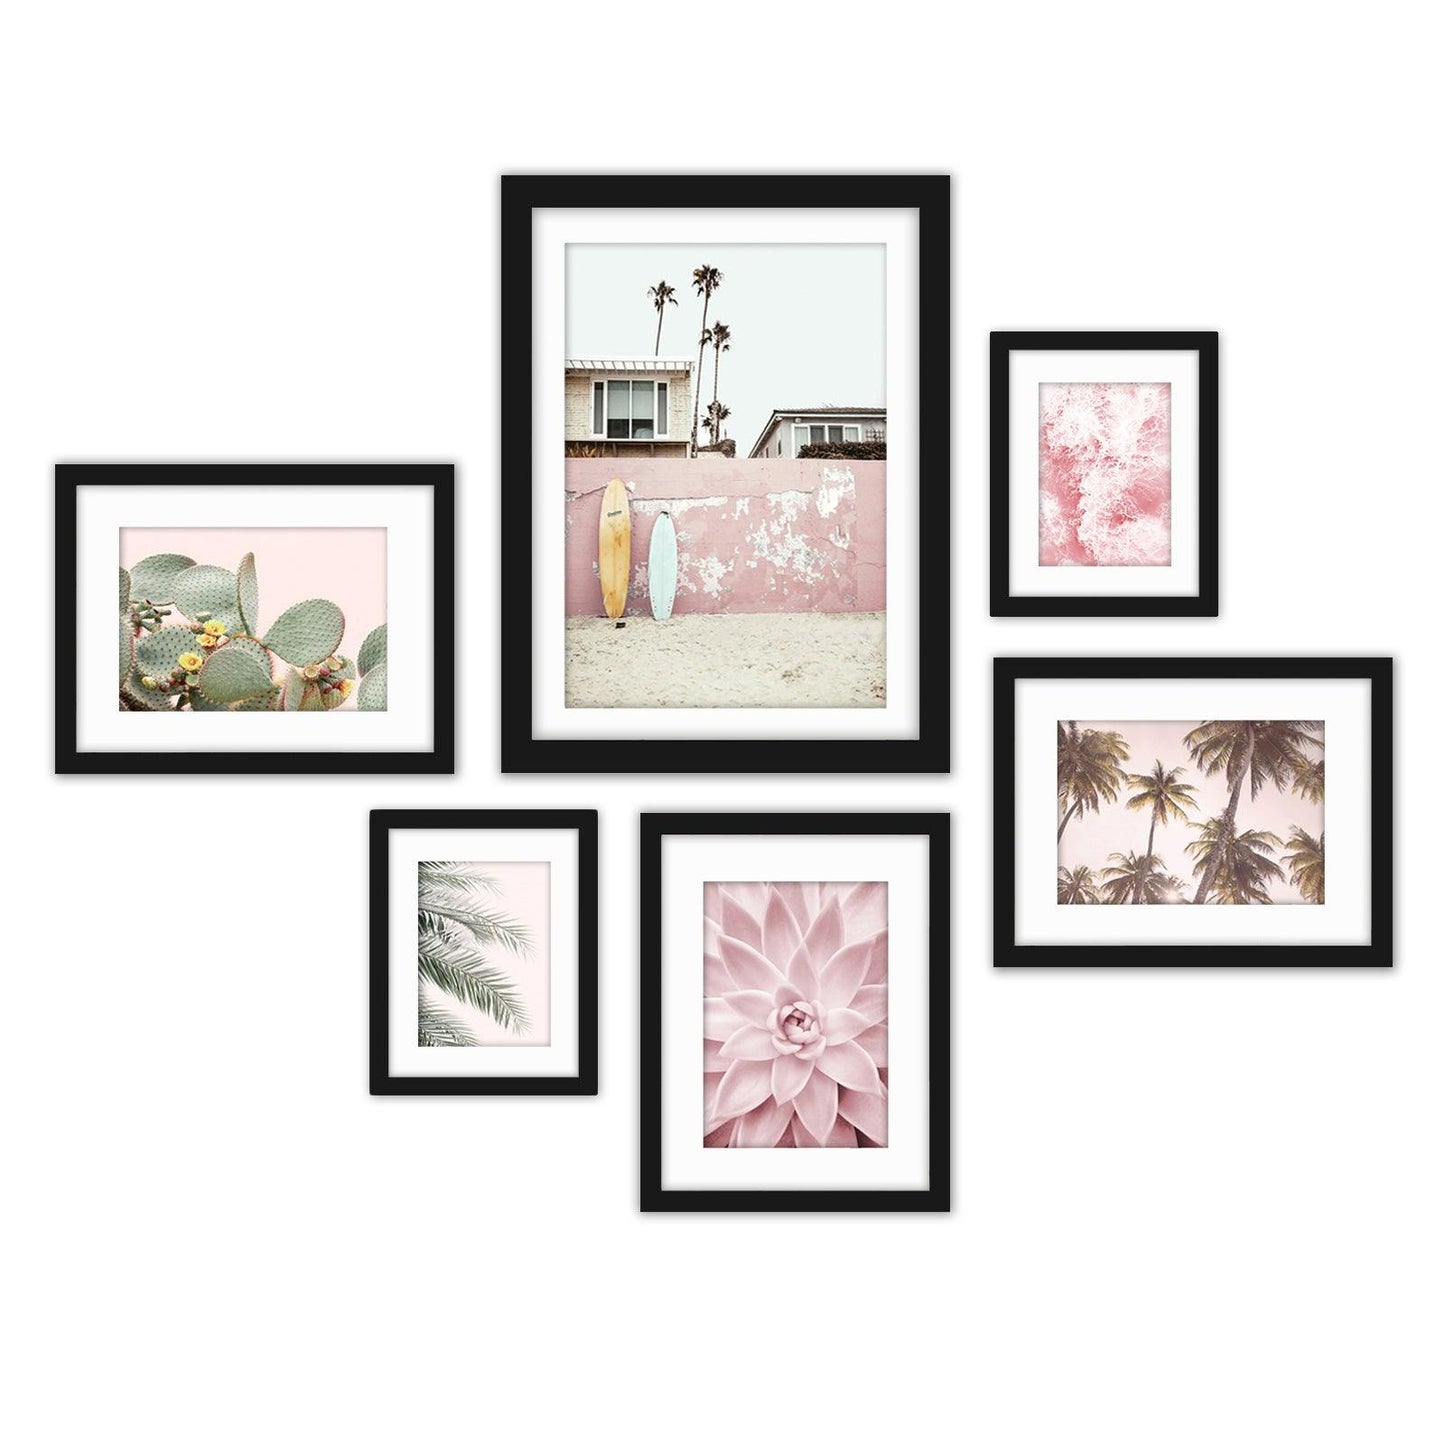 Southwest Beach Photography - 6 Piece Framed Gallery Wall Set - Americanflat